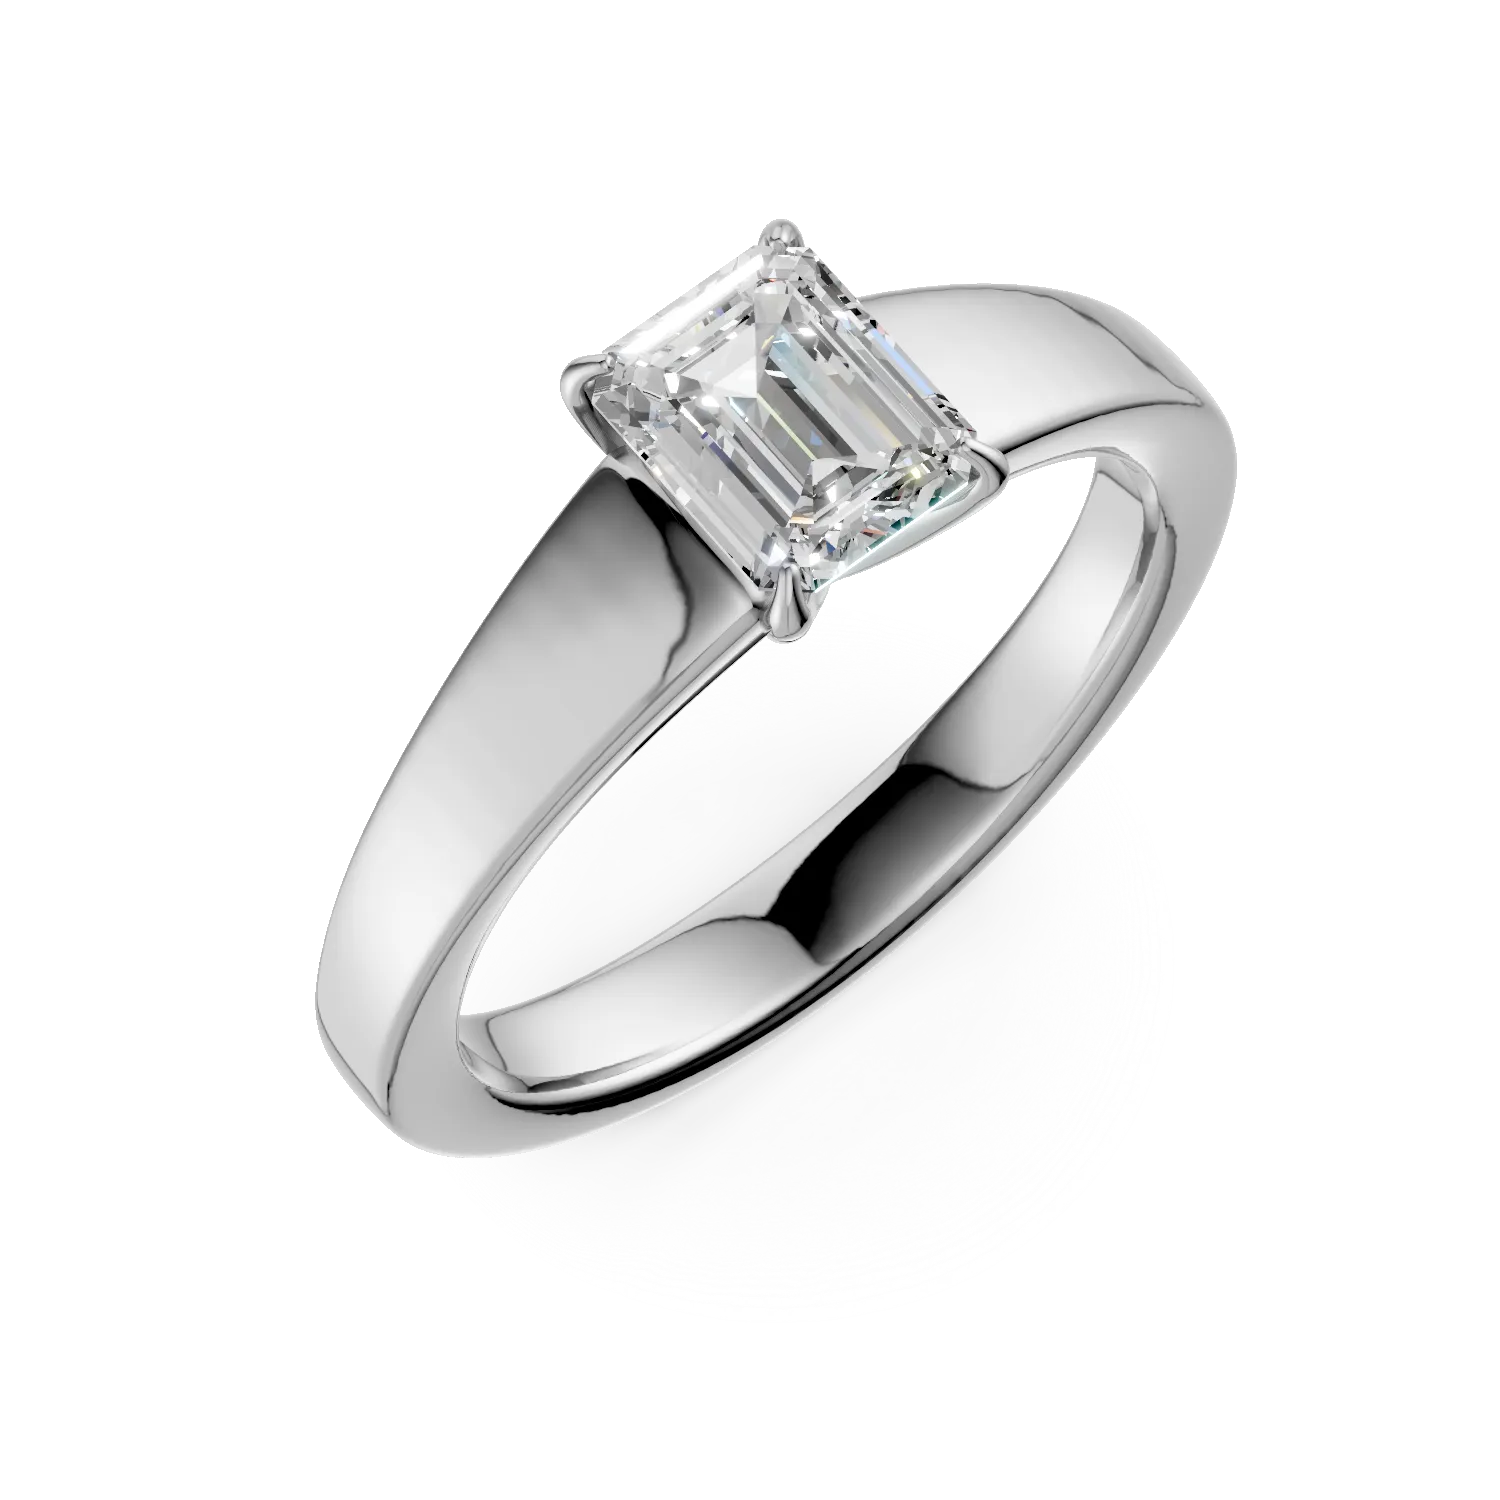 White gold engagement ring with 0.72ct solitaire diamond